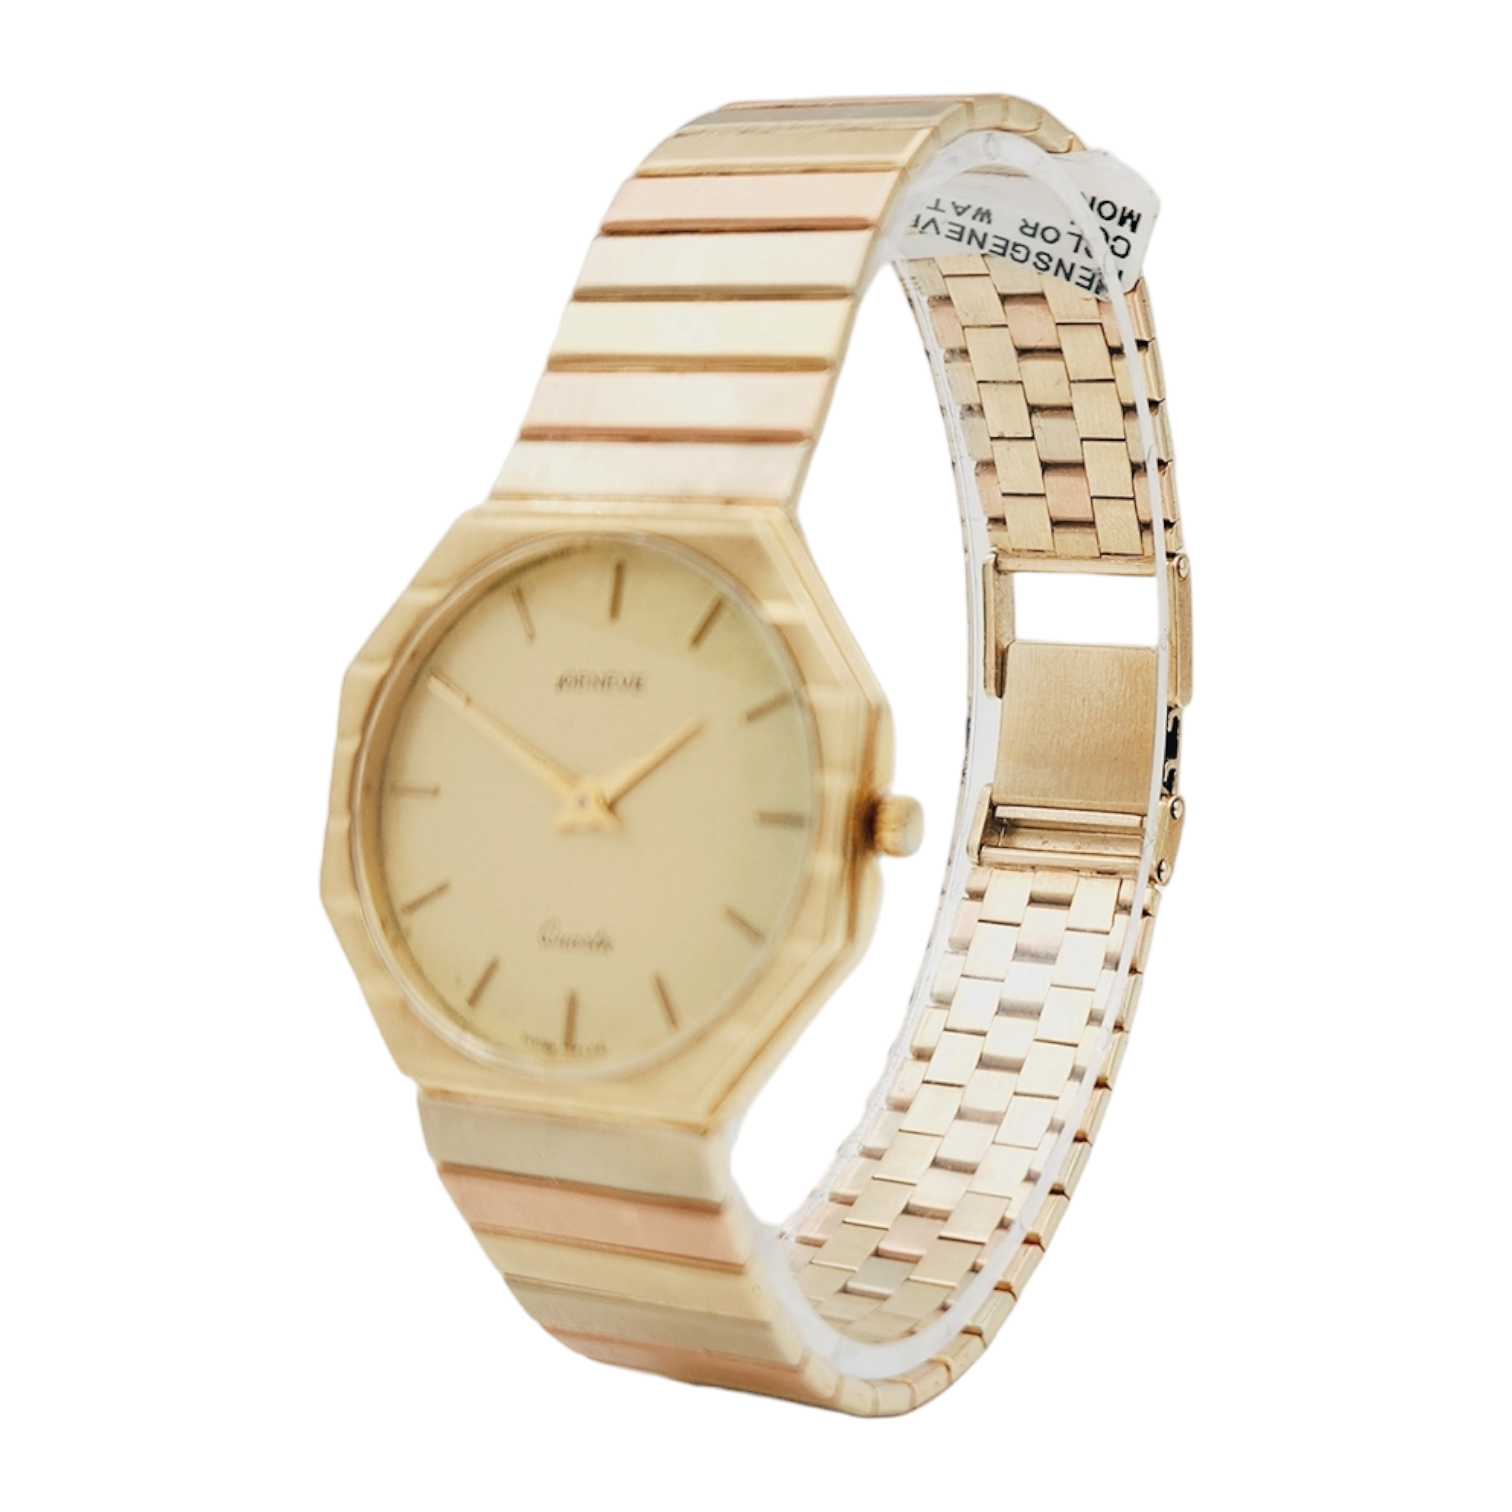 Unisex Geneve 32mm Vintage 14K Yellow Gold Watch with Gold Dial and Fluted Bezel. (Pre-Owned)